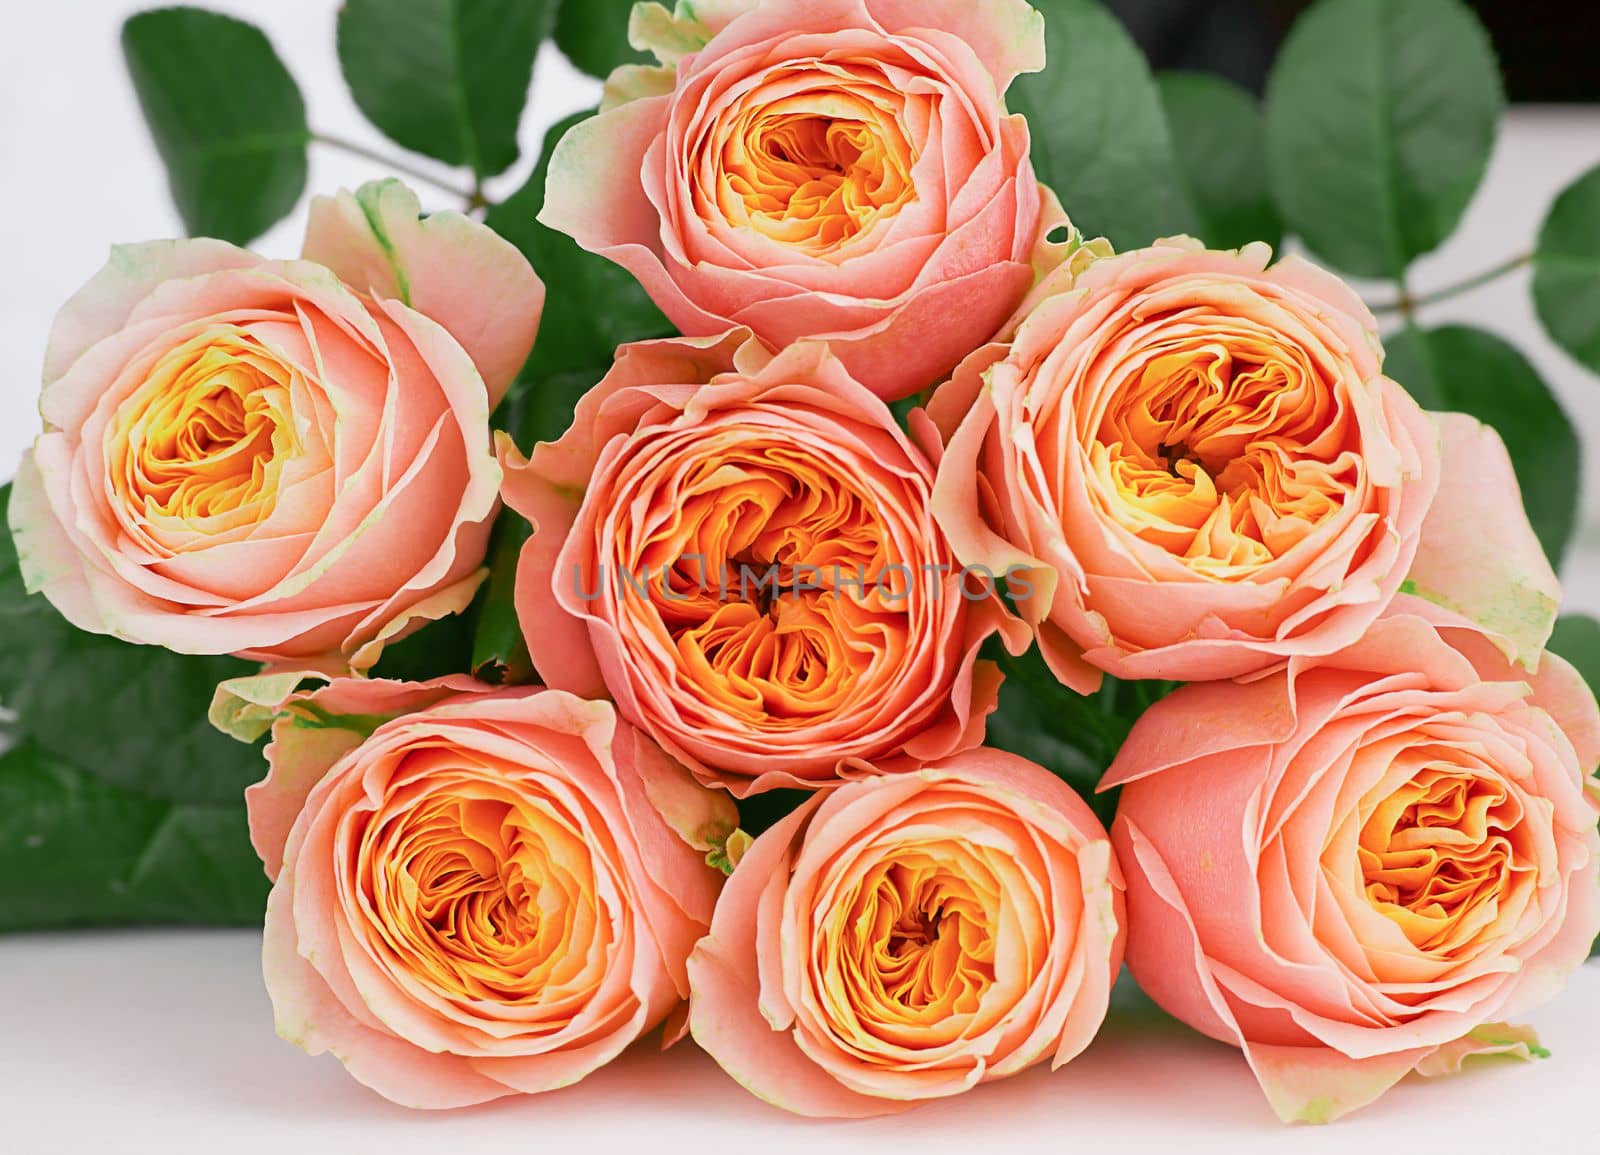 bouquet of pink orange fresh roses close up view by Kondrateva